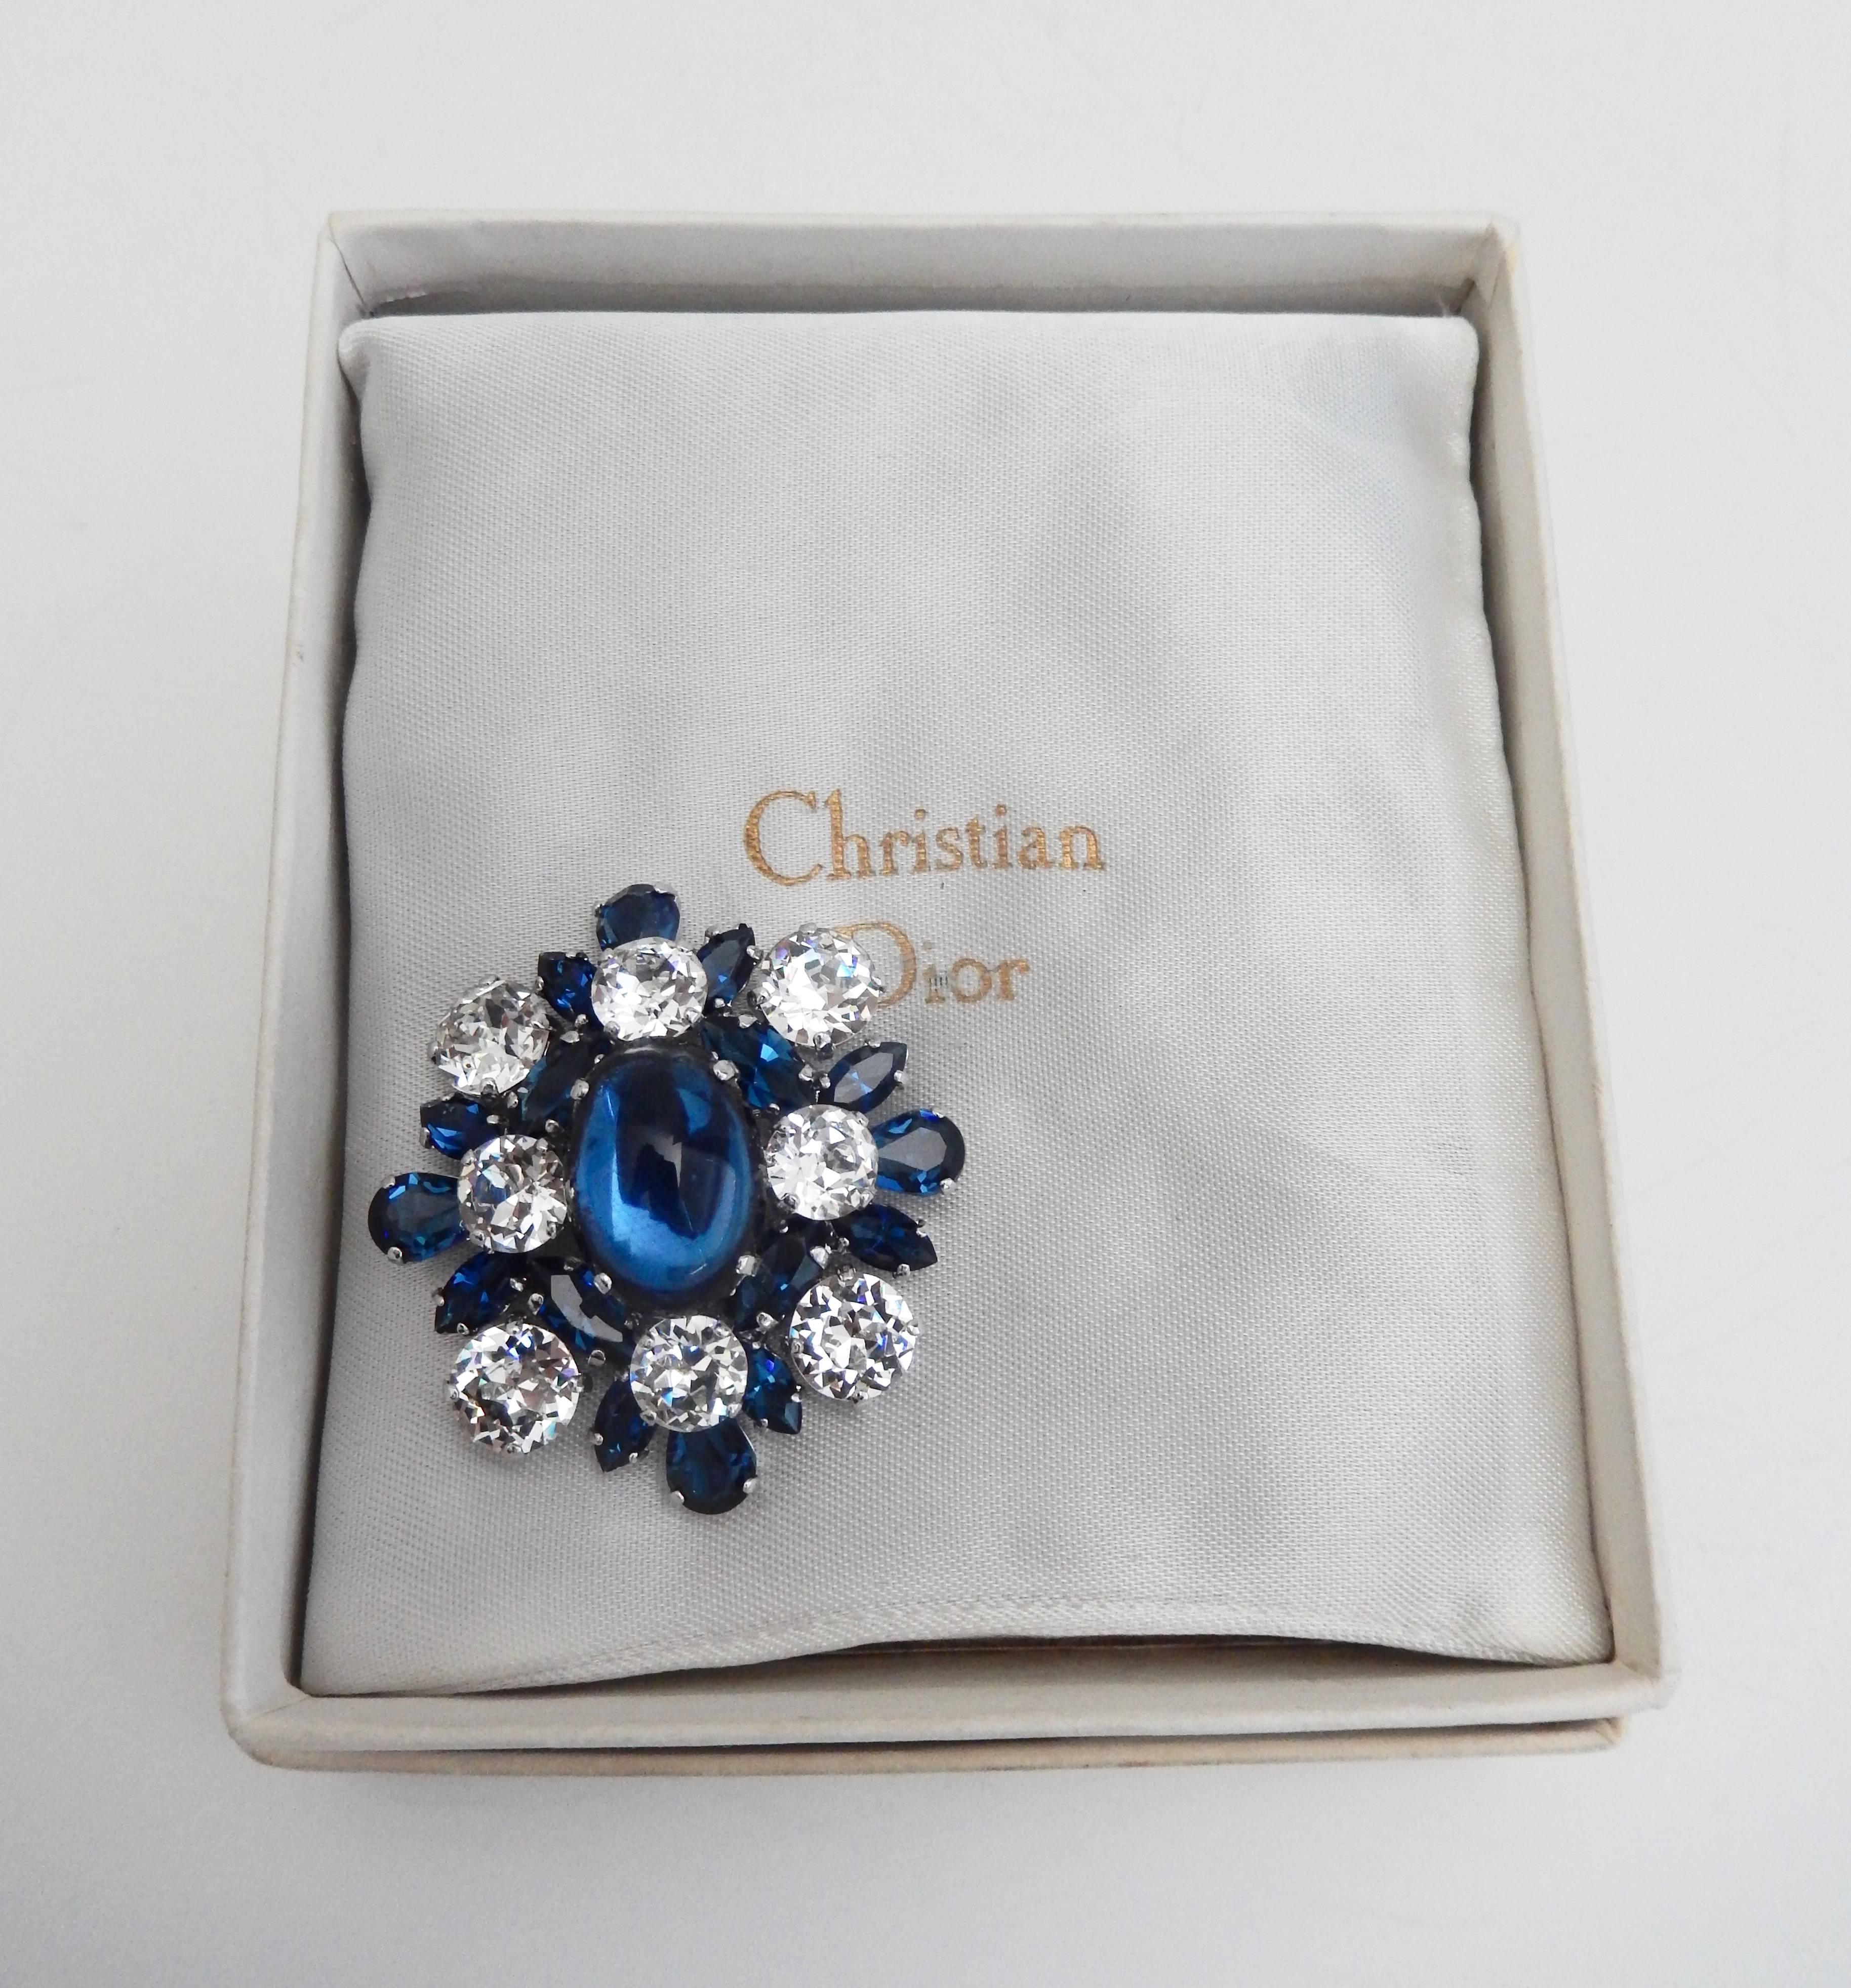 Modernist Christian Dior Faux Sapphire and Diamond Brooch, 1959 